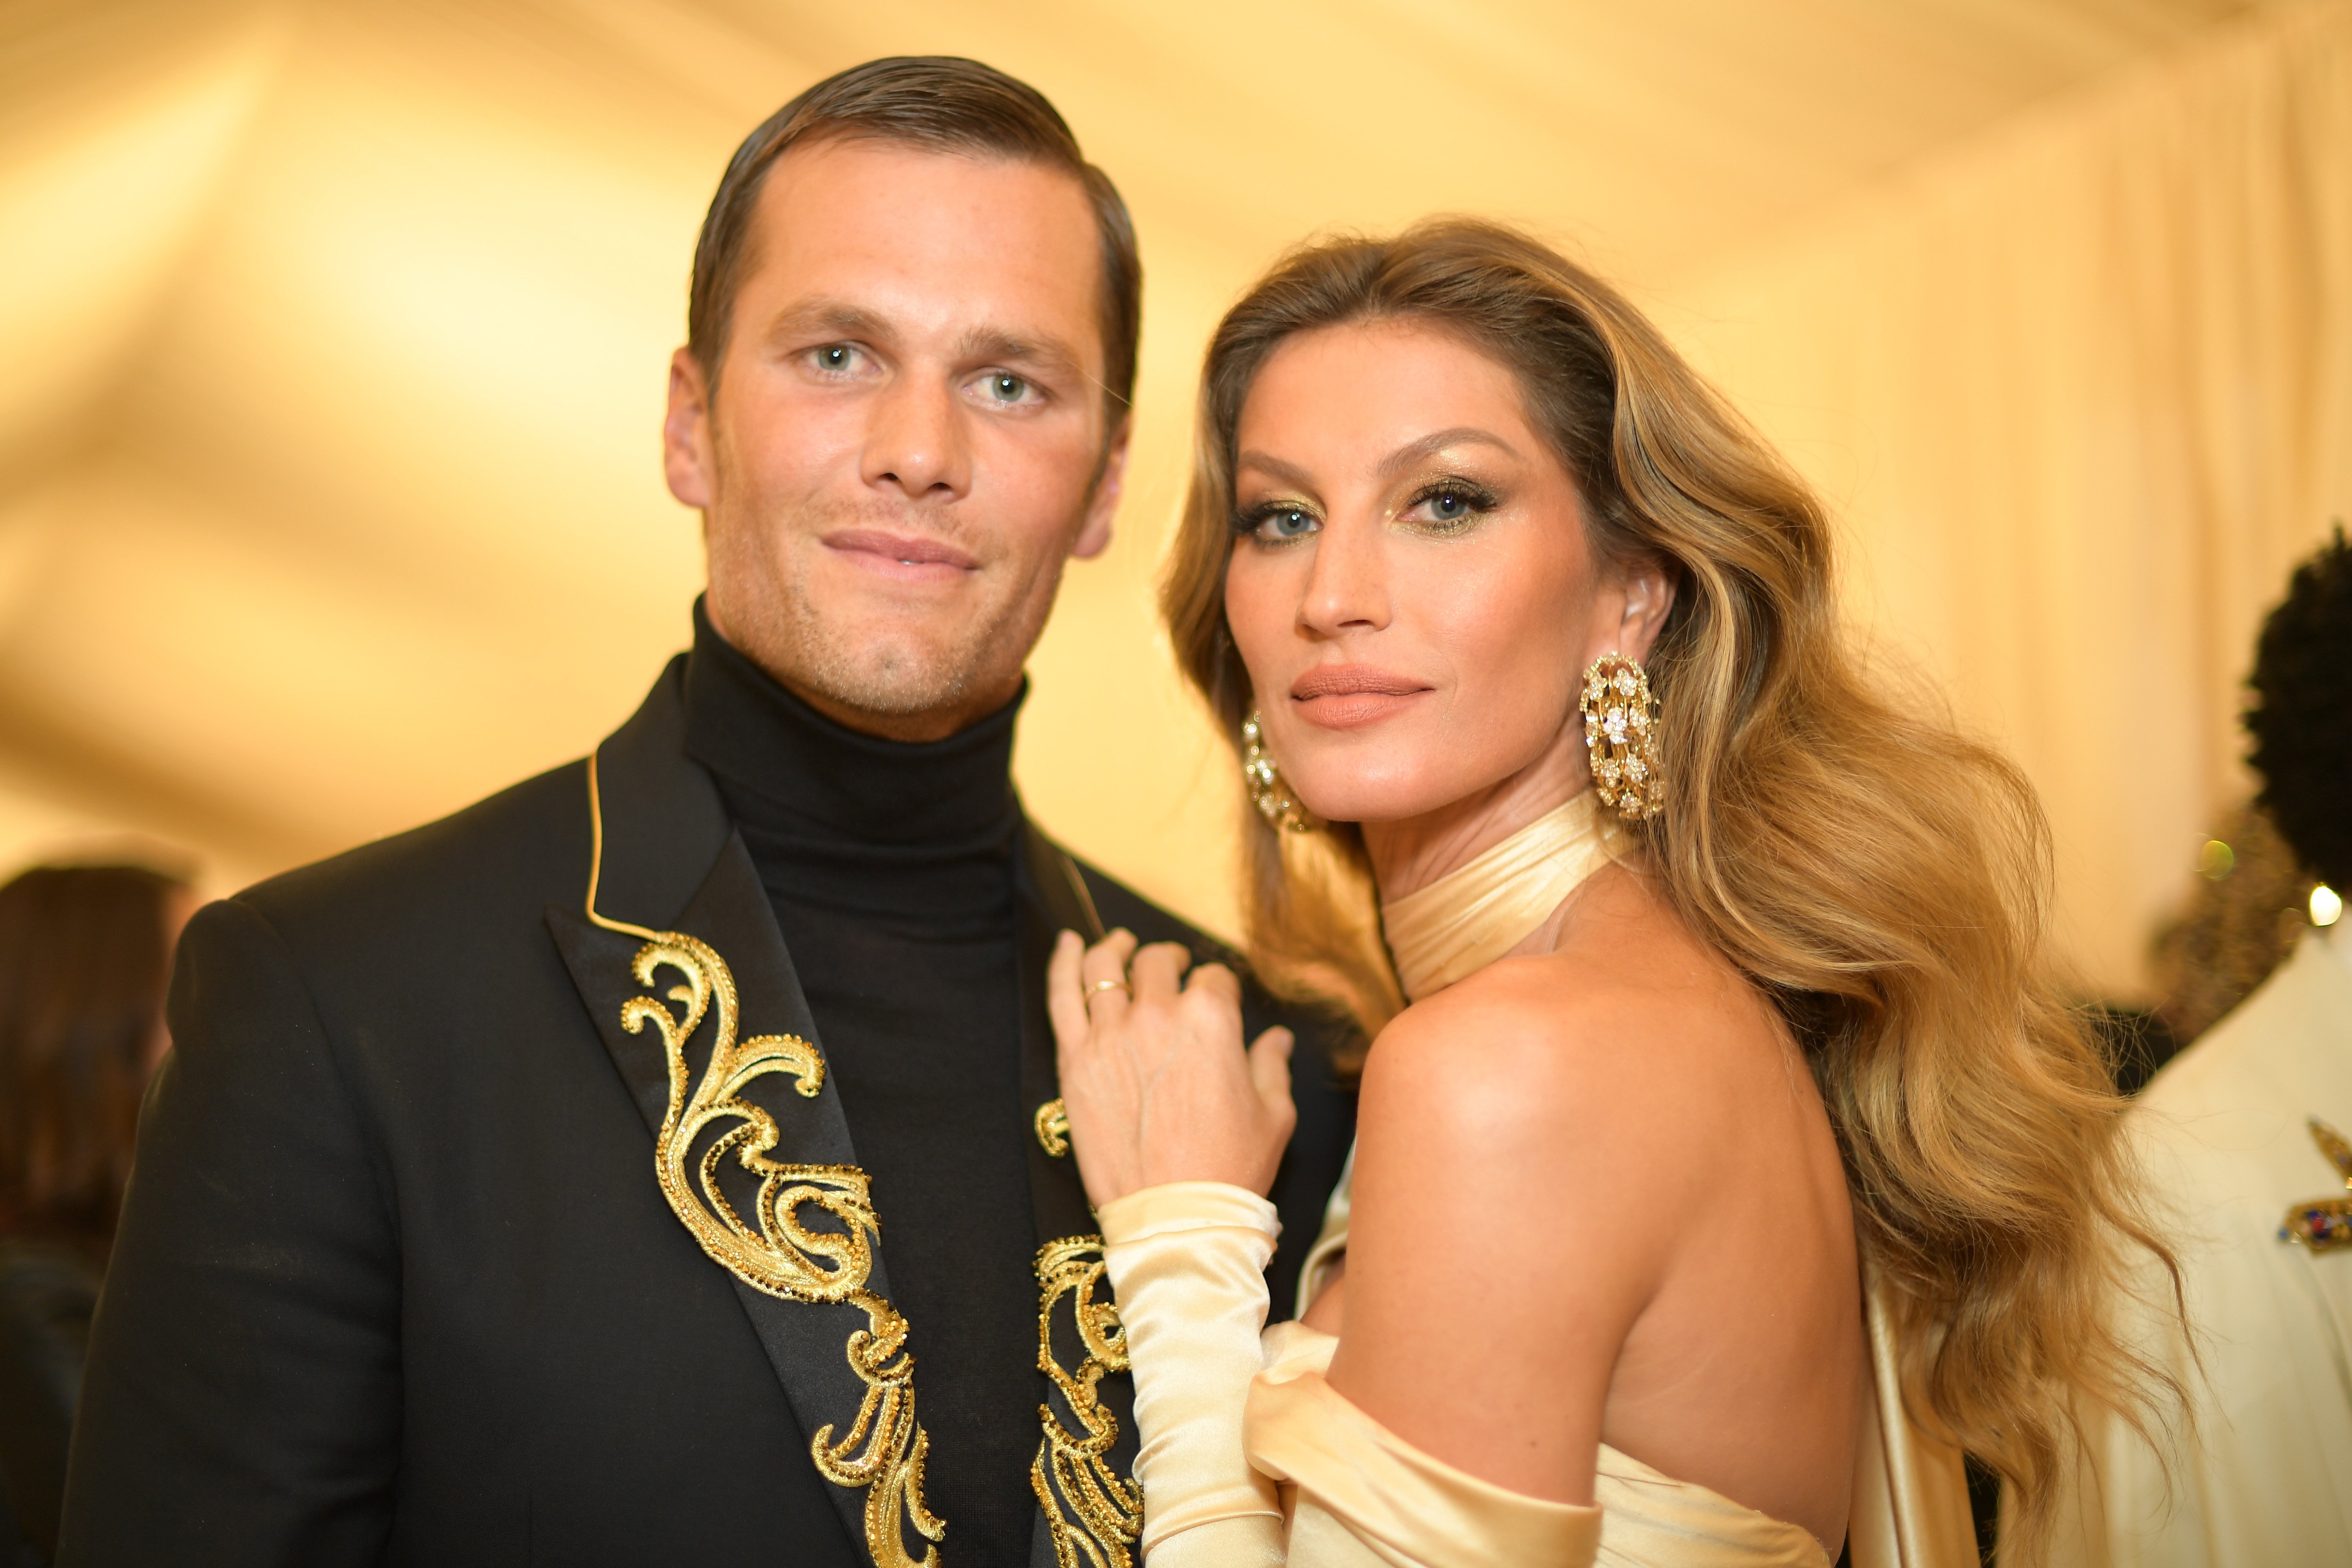  Tom Brady and Gisele Bundchen attend the Heavenly Bodies: Fashion & The Catholic Imagination Costume Institute Gala at The Metropolitan Museum of Art on May 7, 2018 in New York City | Photo: GettyImages